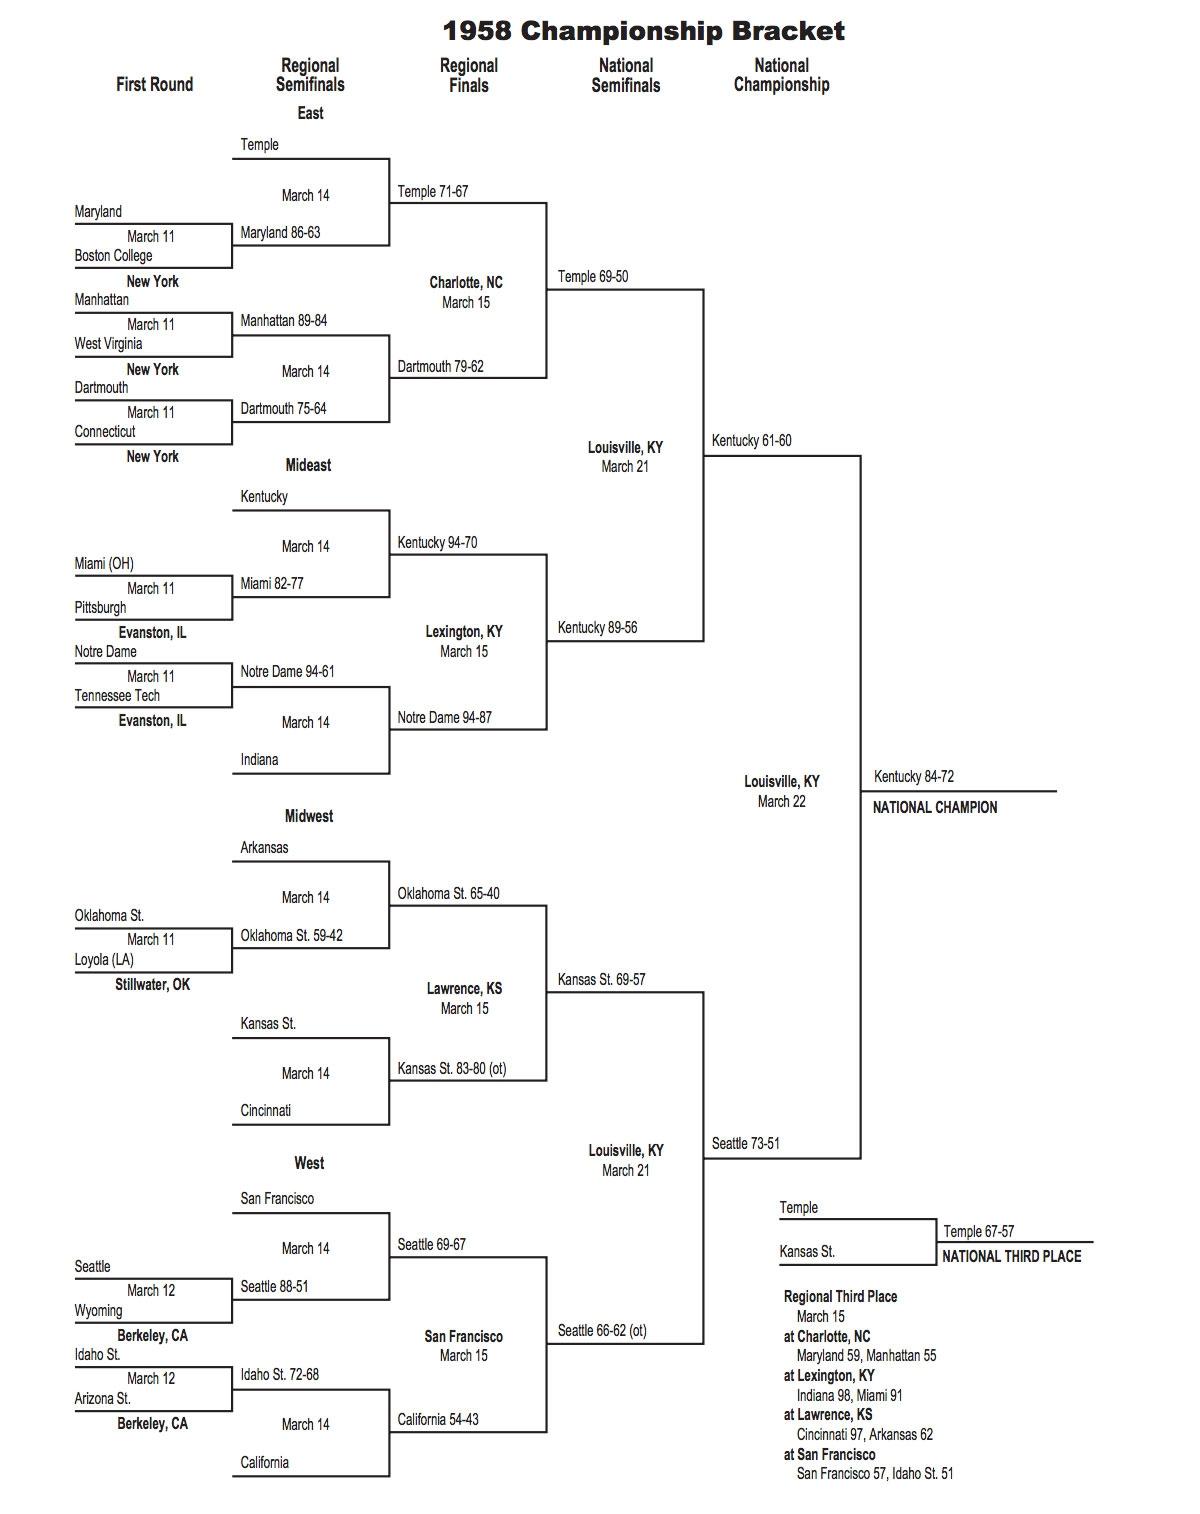 This is the 1958 NCAA tournament bracket